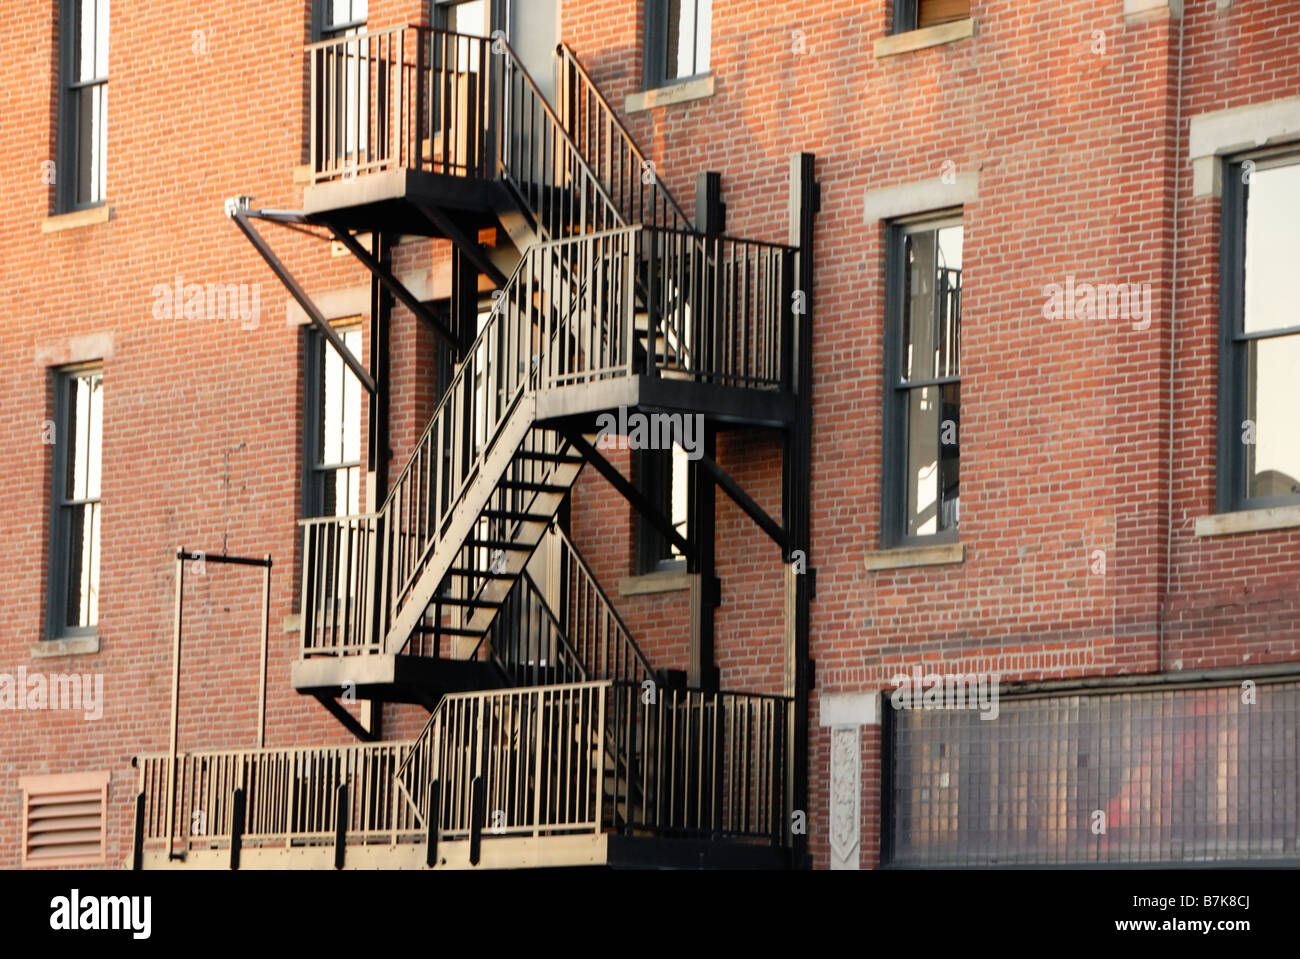 Fire escape on side of red brick building Stock Photo